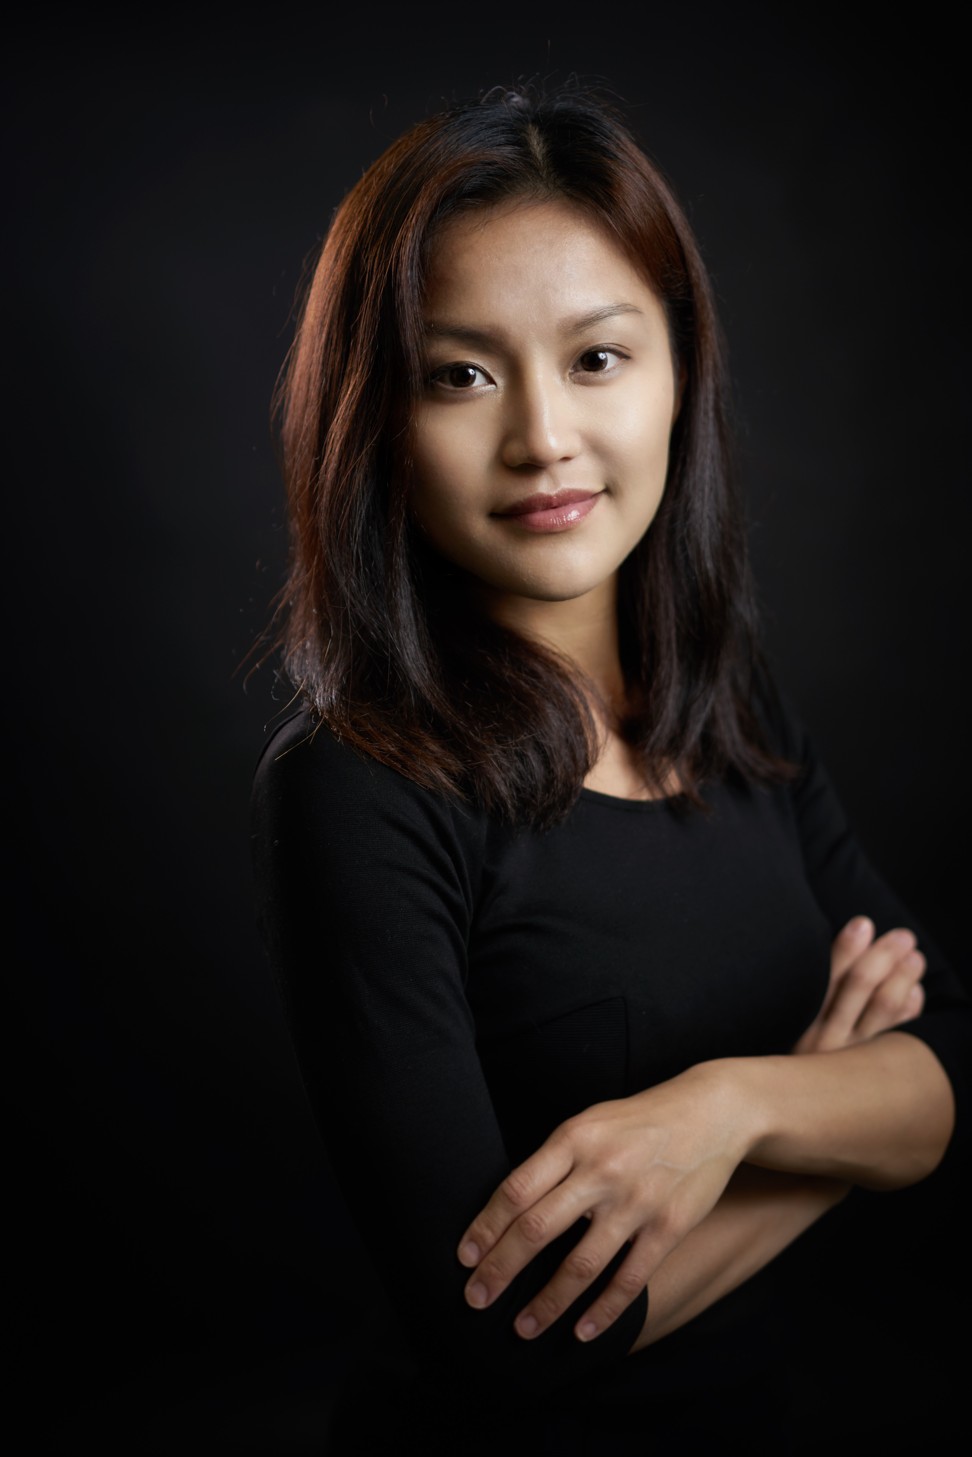 Michelle Lau is a registered nutritionist and founder of Nutrilicious.